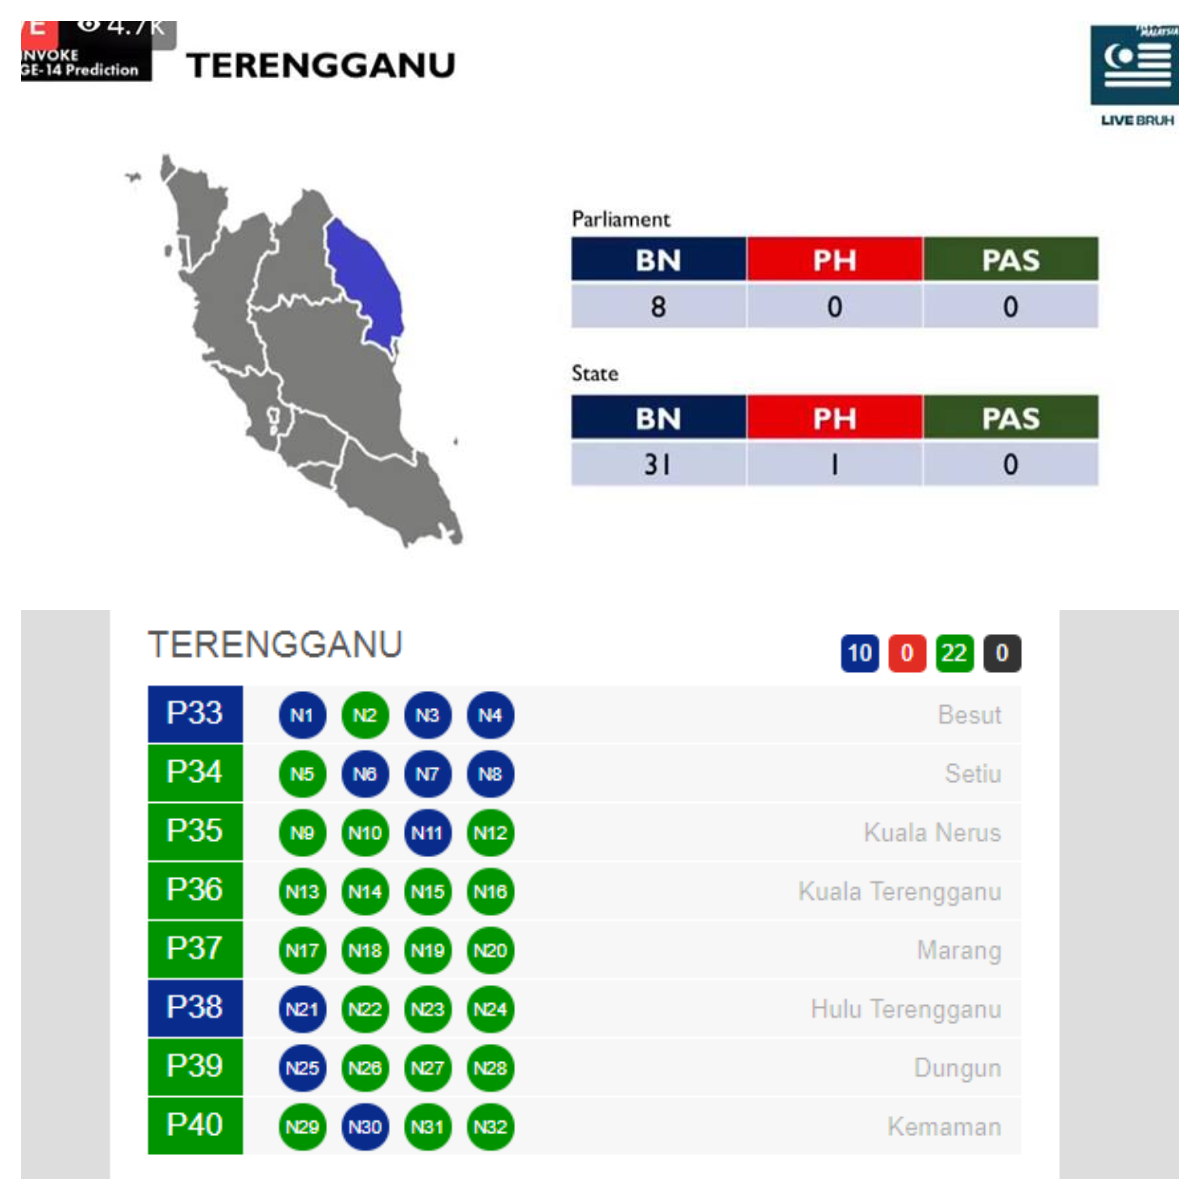 Prediction of GE14 (top) vs the actual result of GE14 (bottom) in Terengganu. Images from Invoke and undi.info